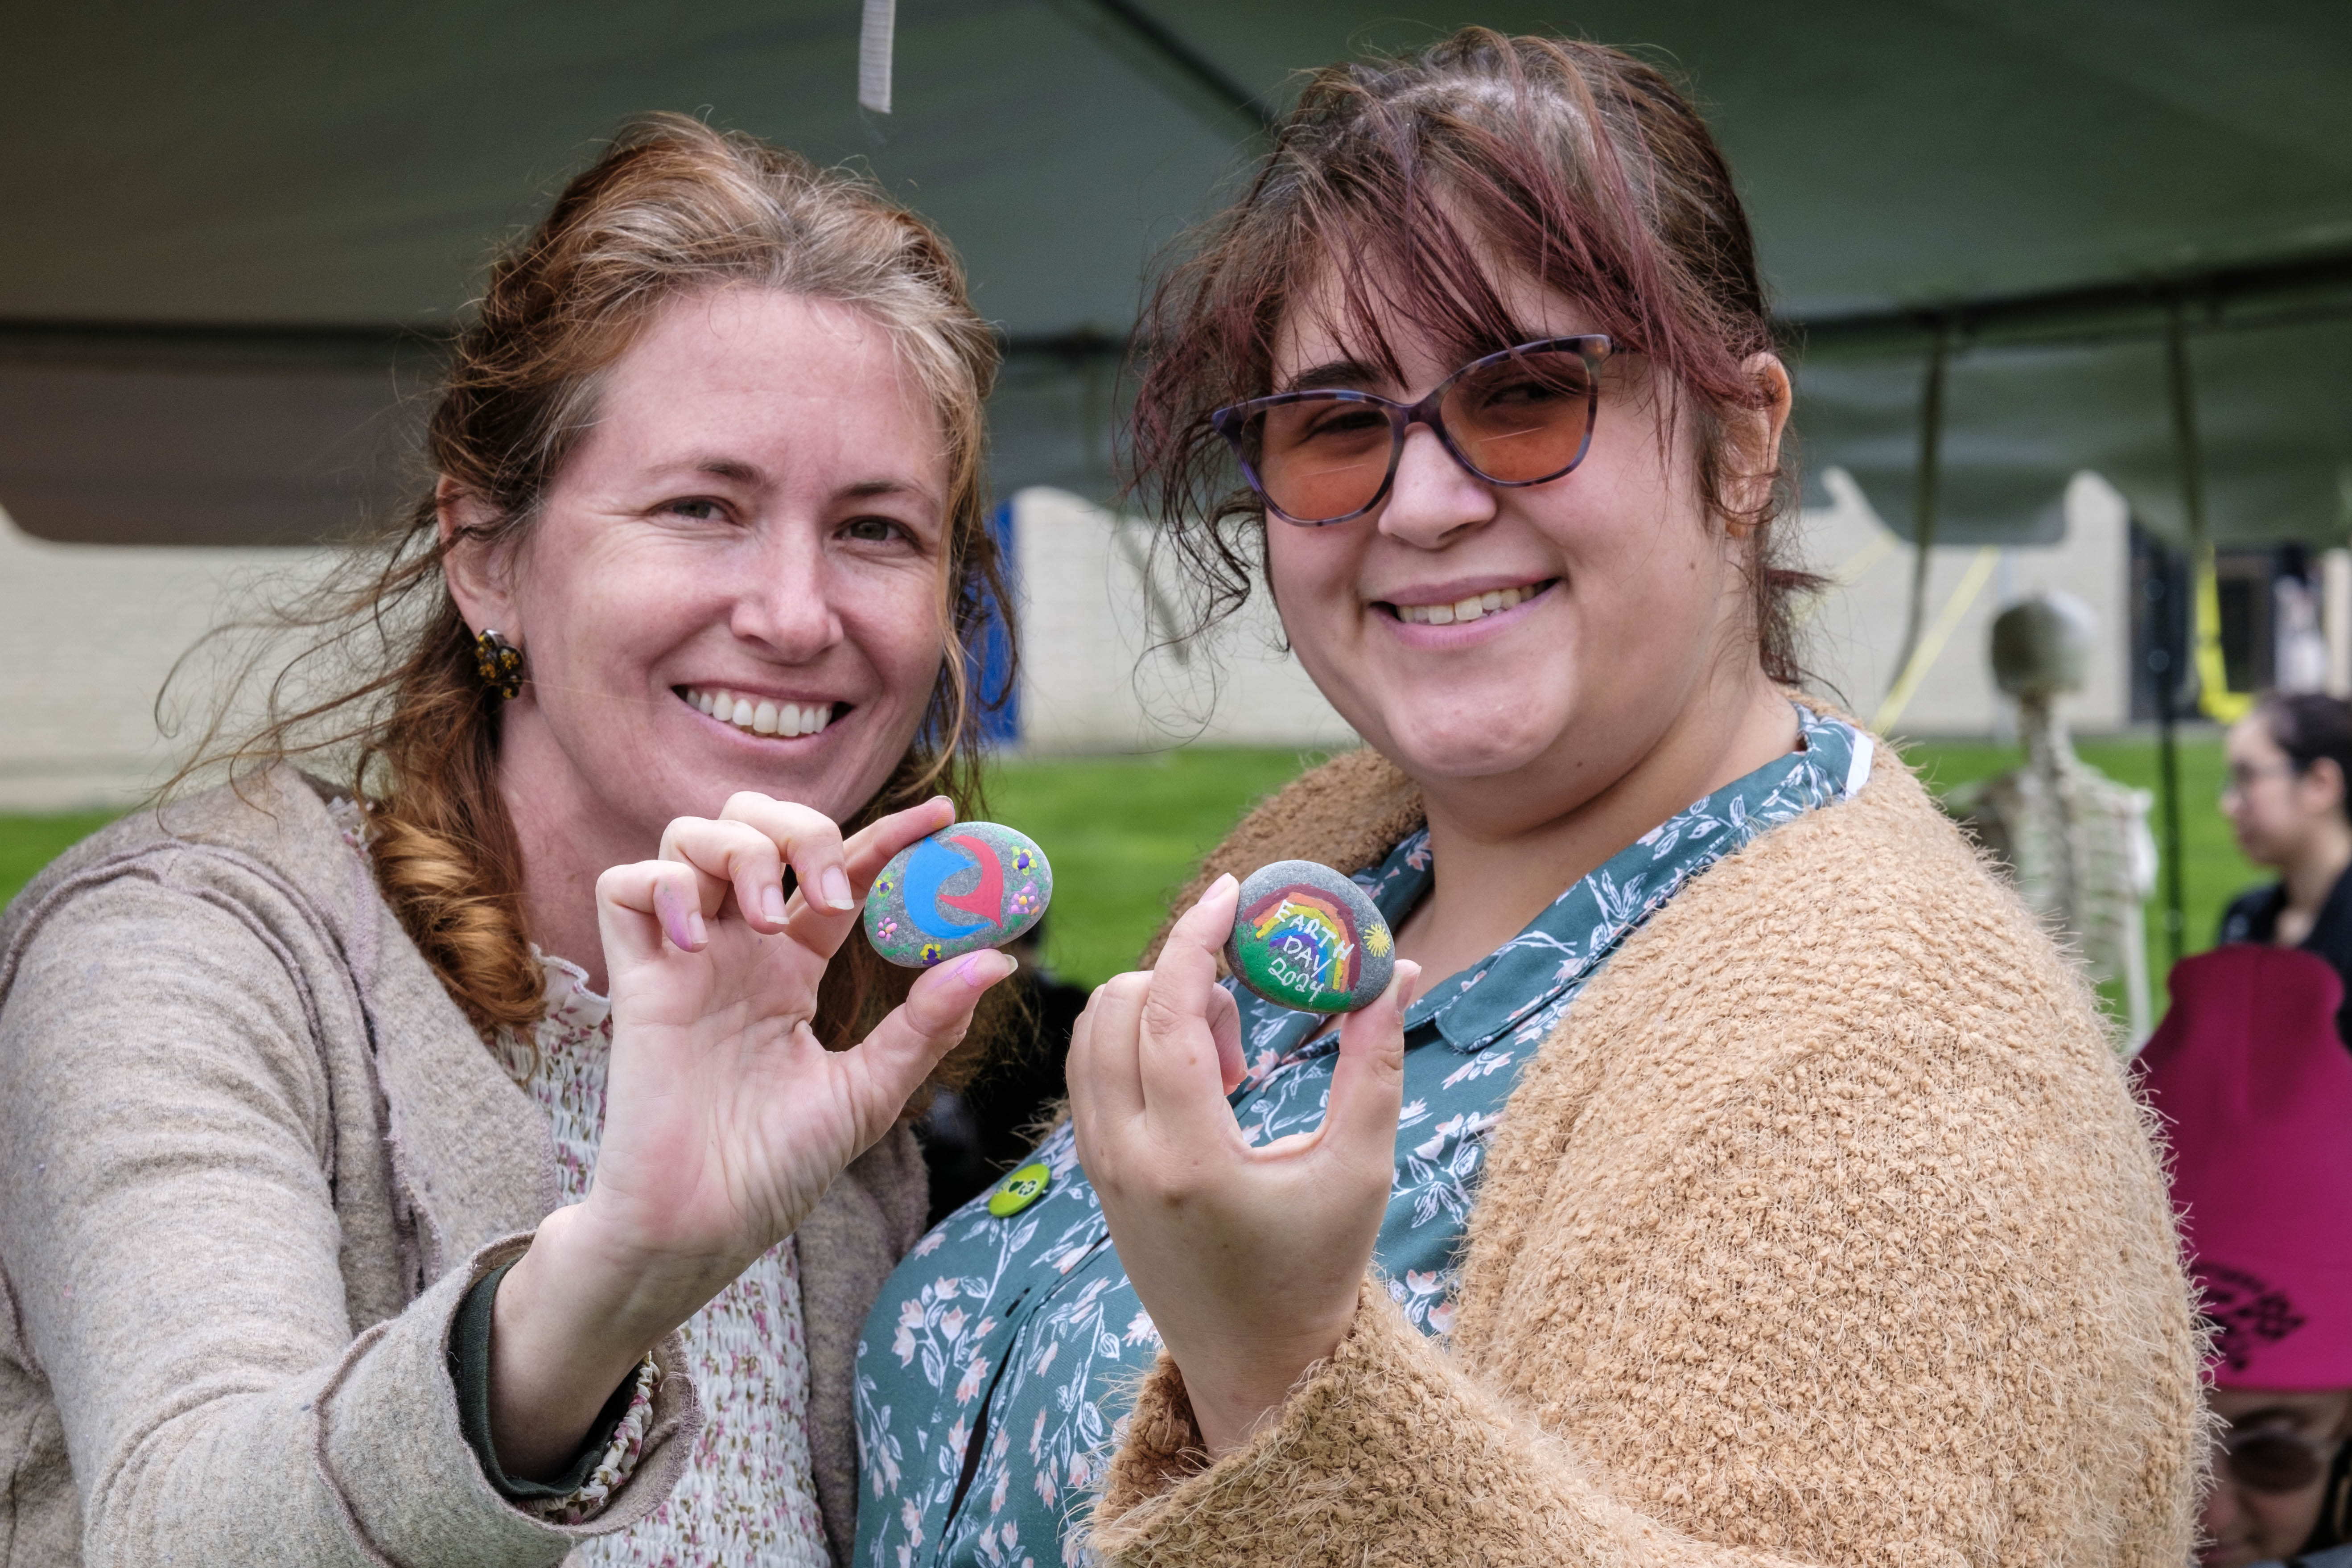 Earth Day festivities on the Mays Landing campus